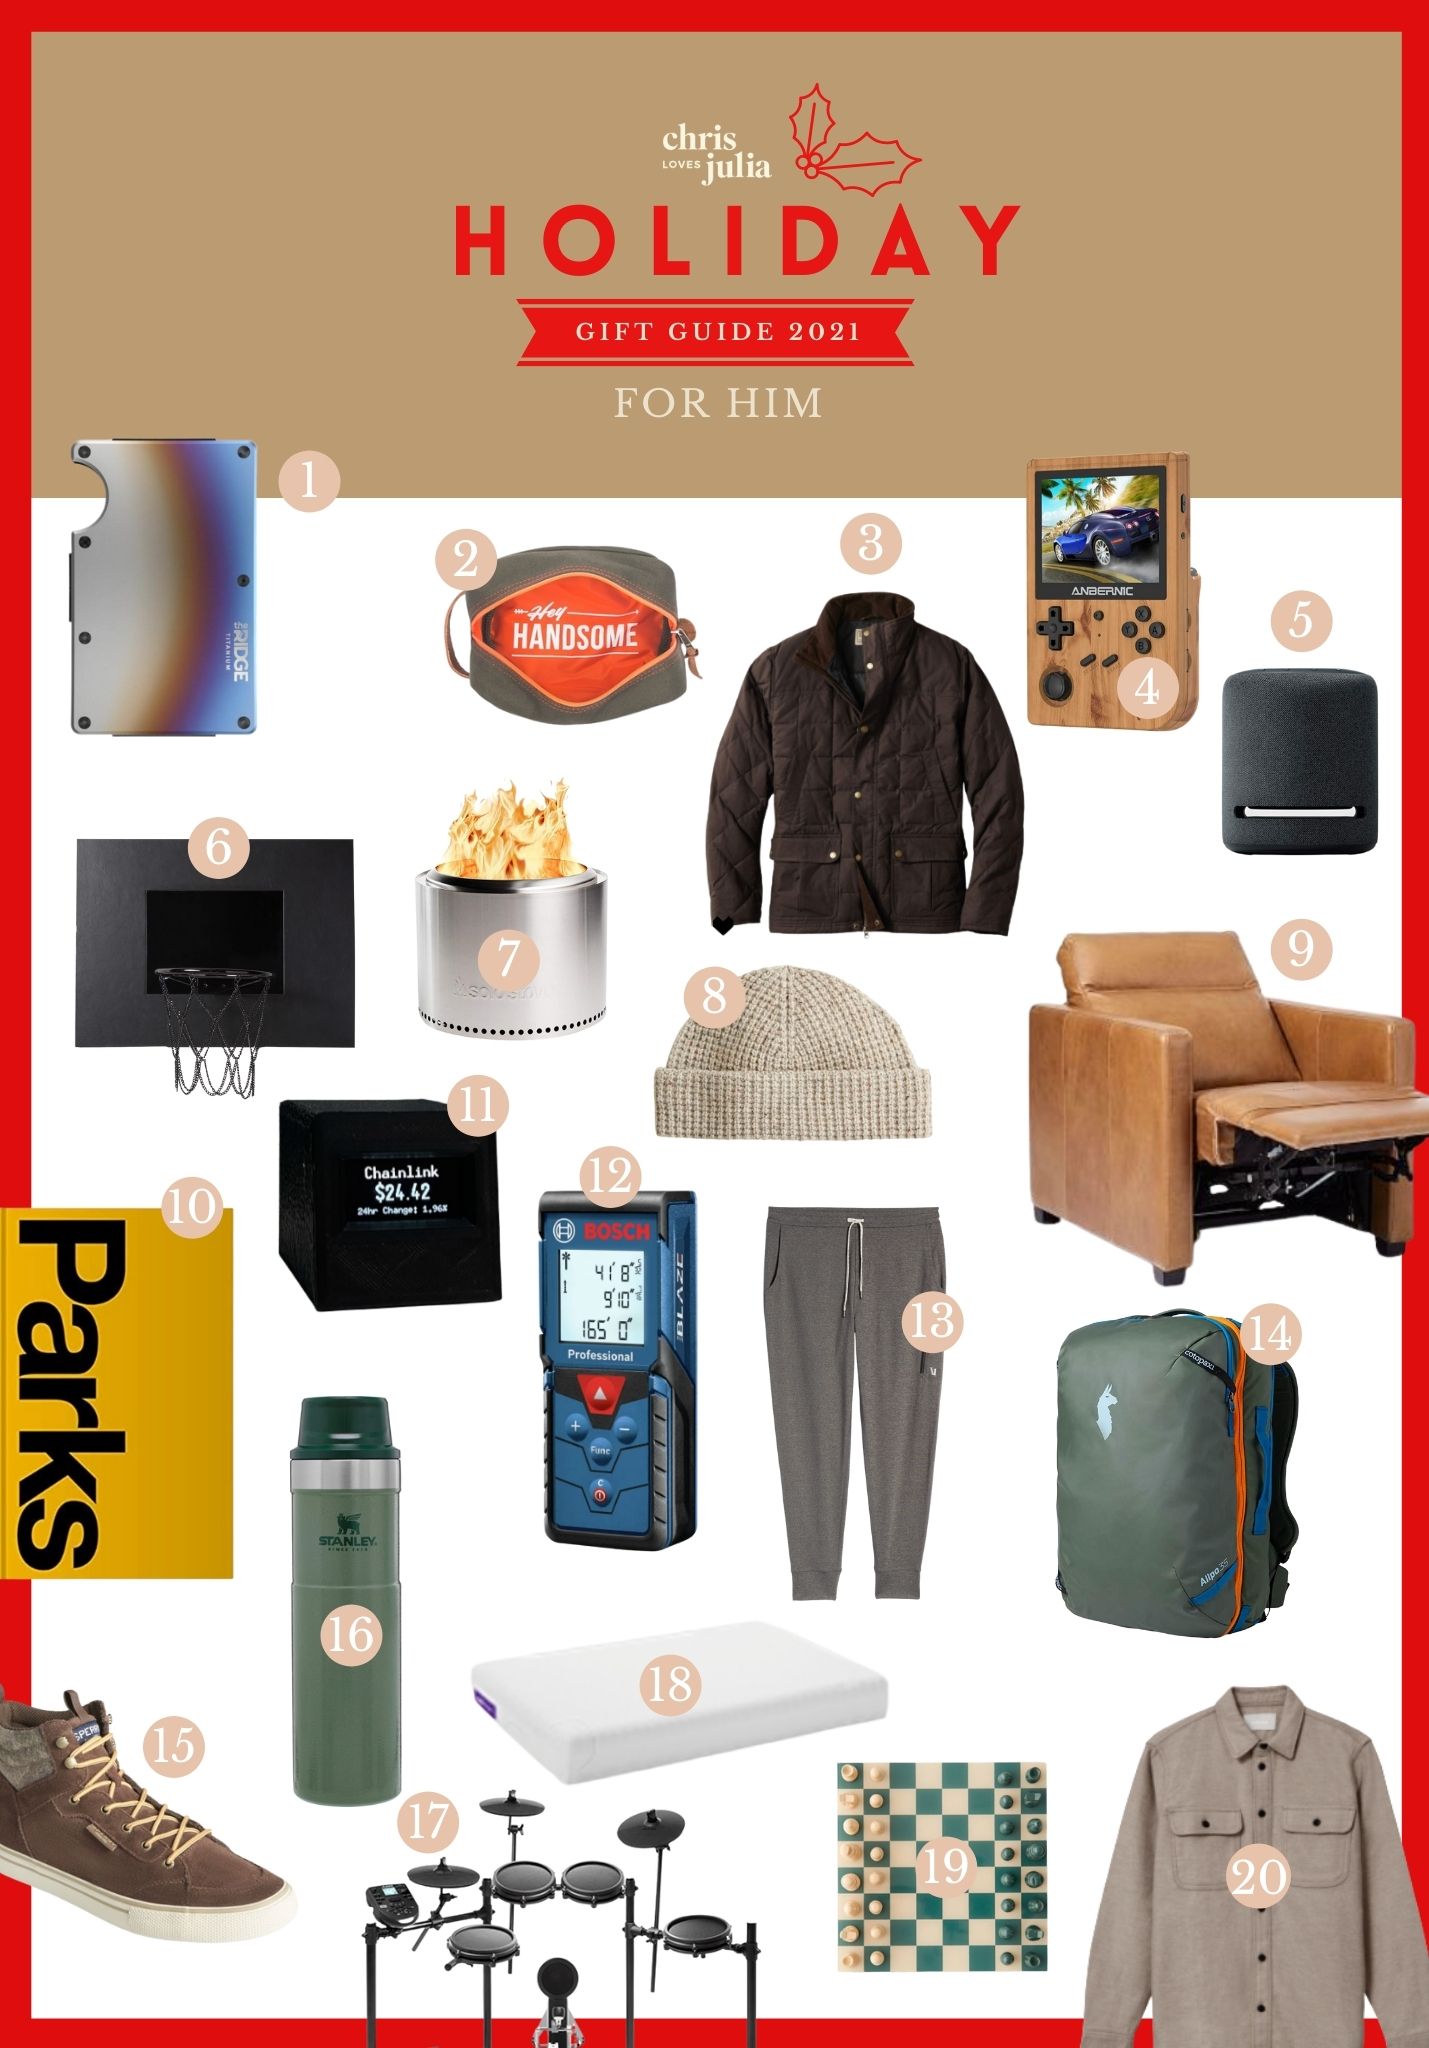 HOLIDAY GIFT GUIDE 2021: Gifts For Men